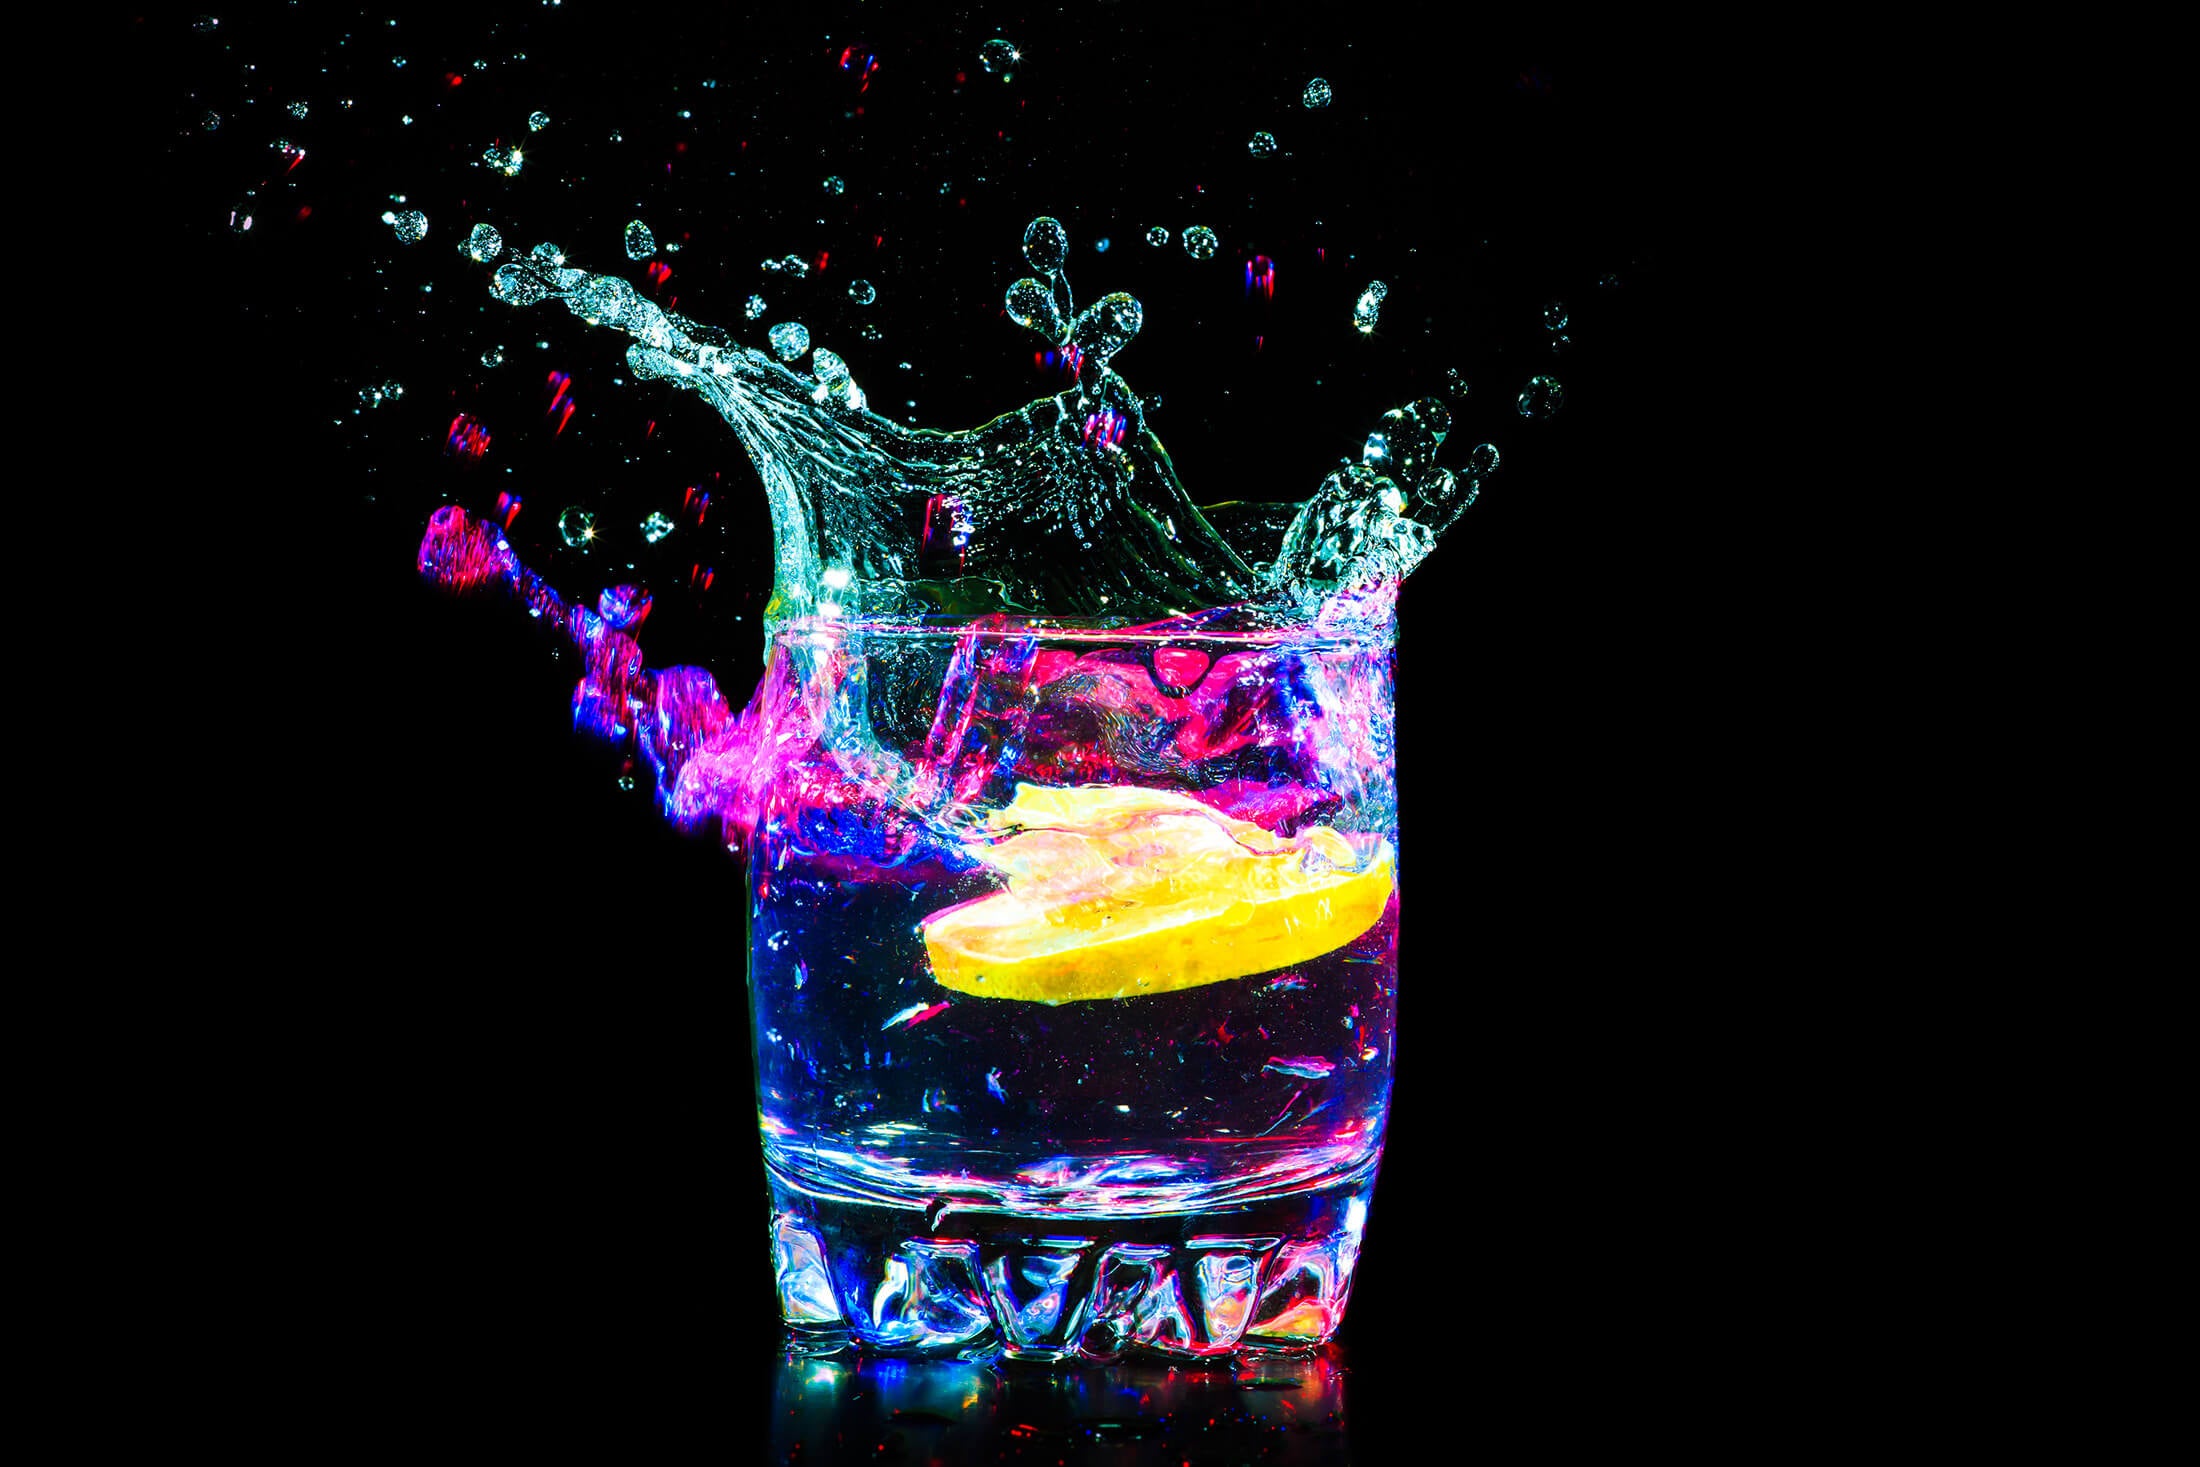 lemon slice dropping into a cocktail glass with liquid splashing in neon colors